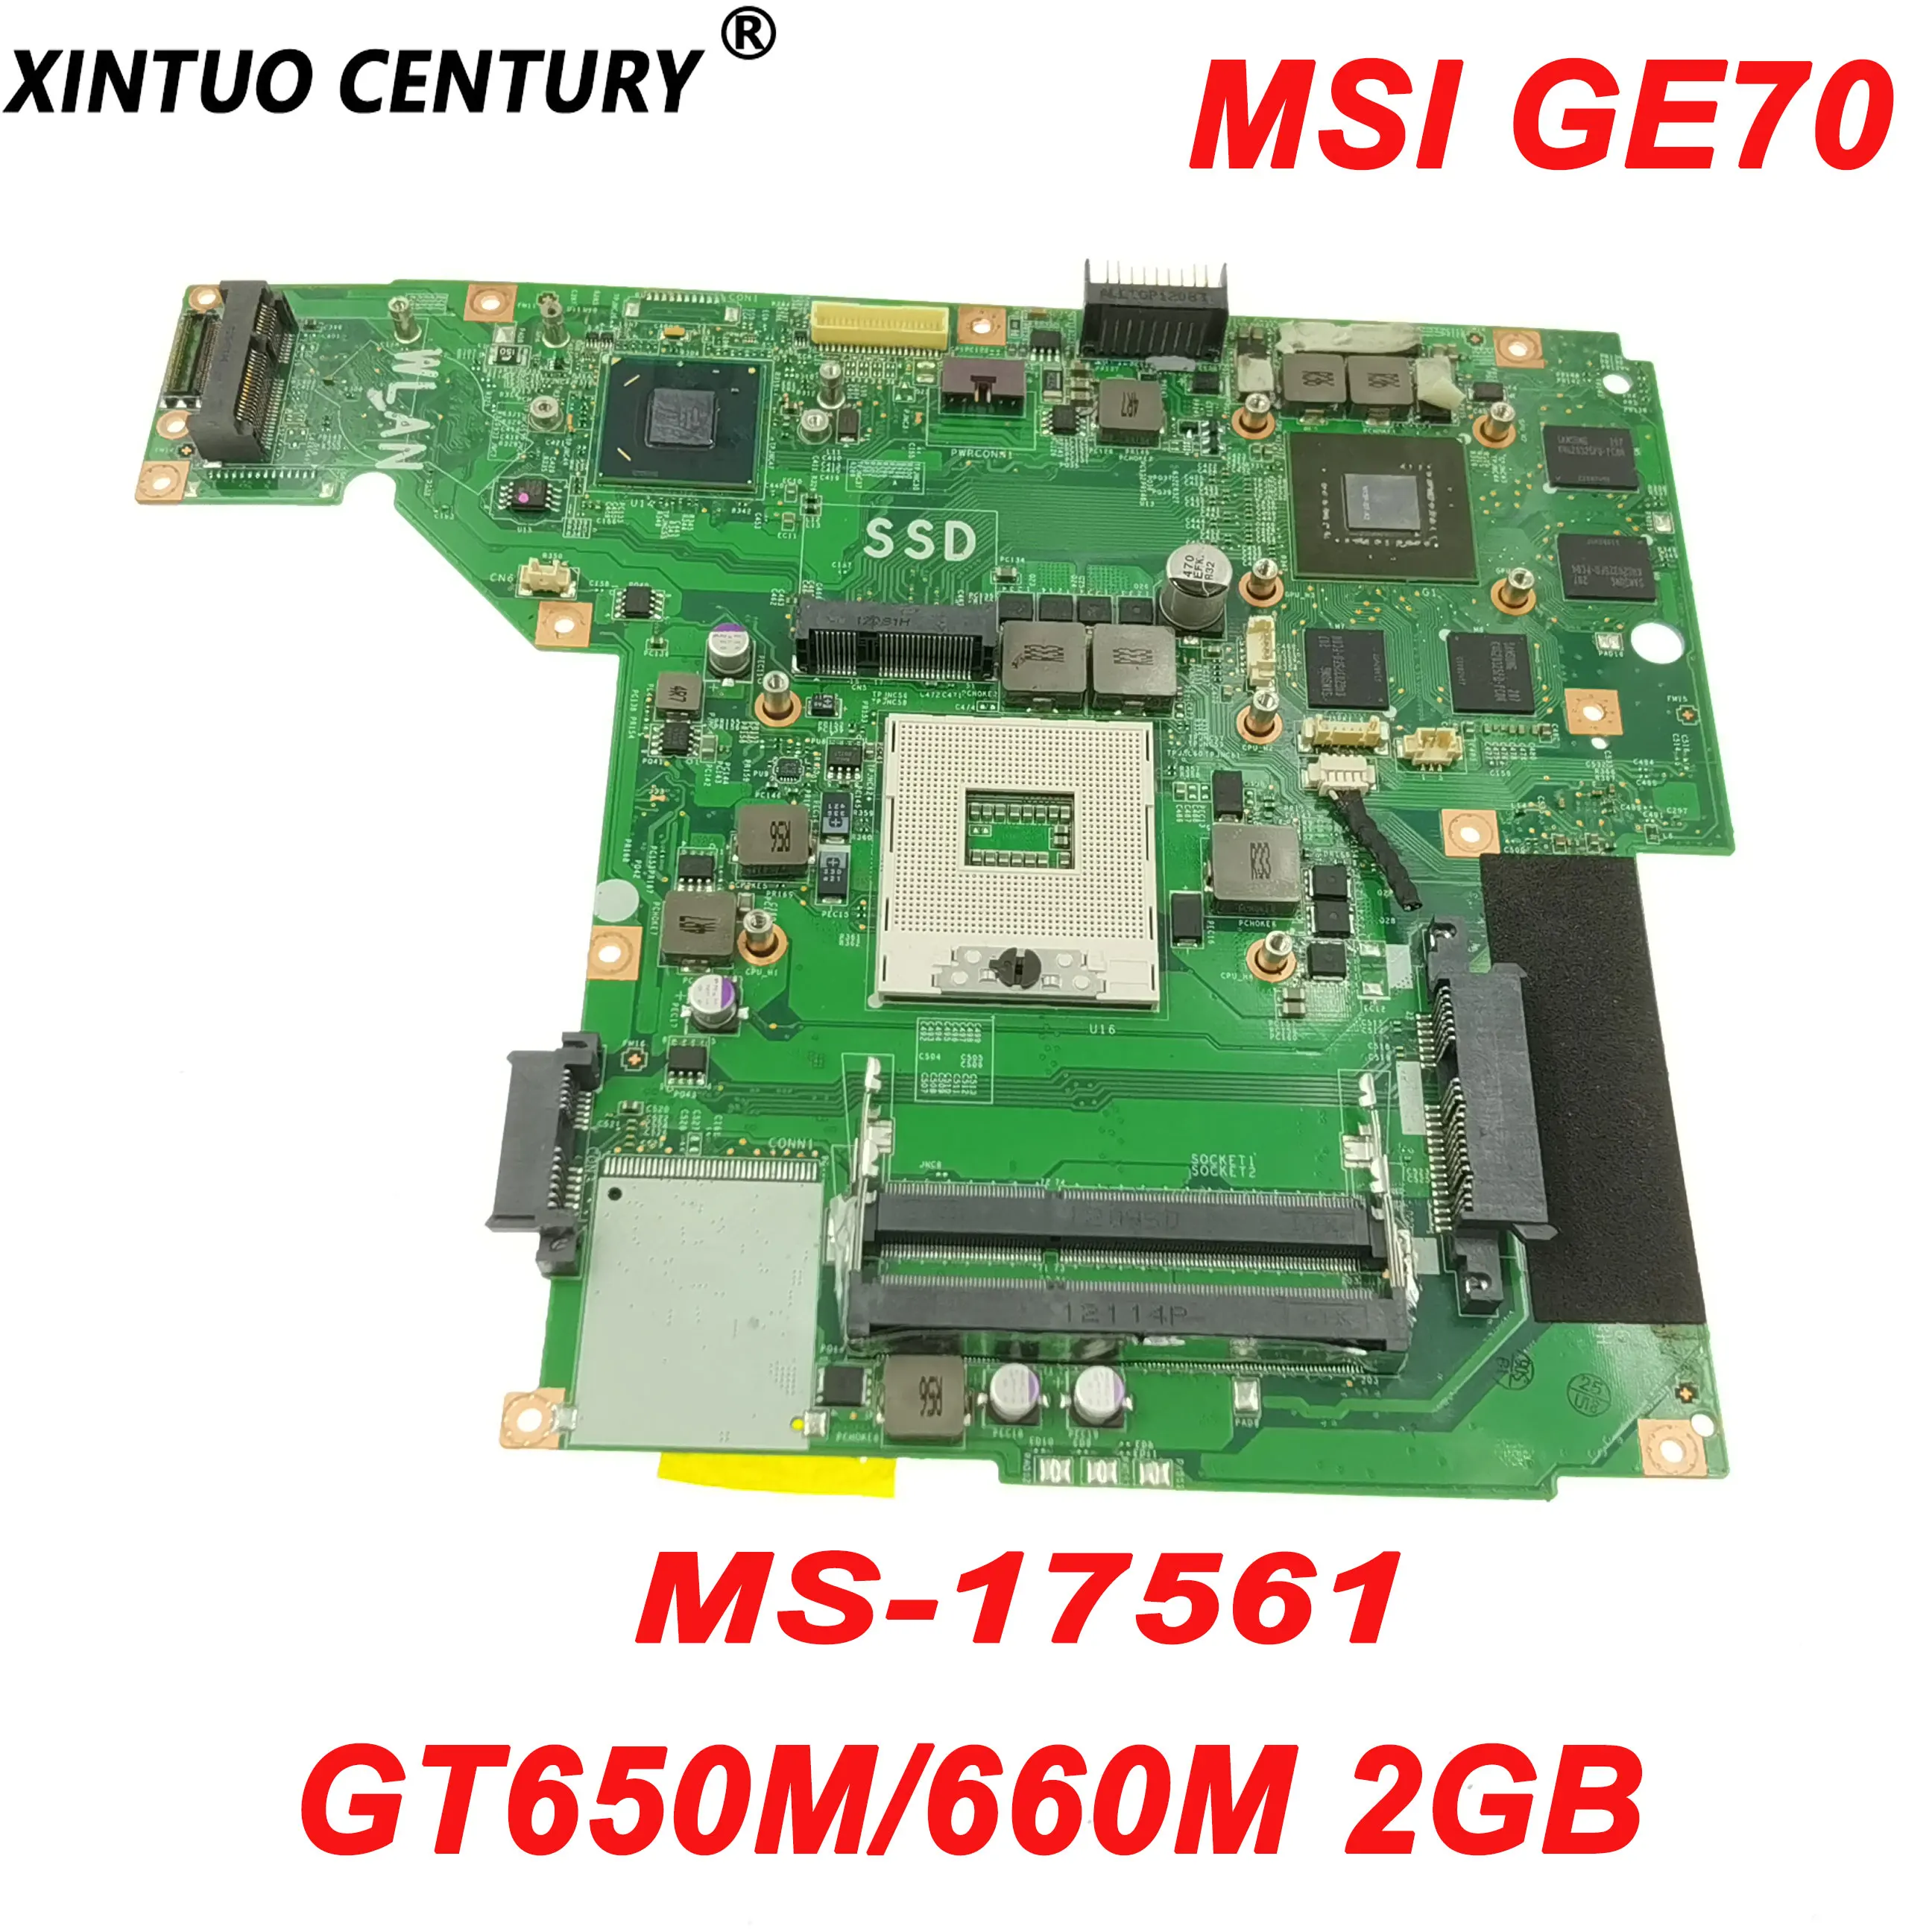 

High Quality MS-17561 Original Motherboard for MSI GE70 Laptop Motherboard HM76 PGA 989 GT650M/660M 2GB GPU DDR3 100% Tested